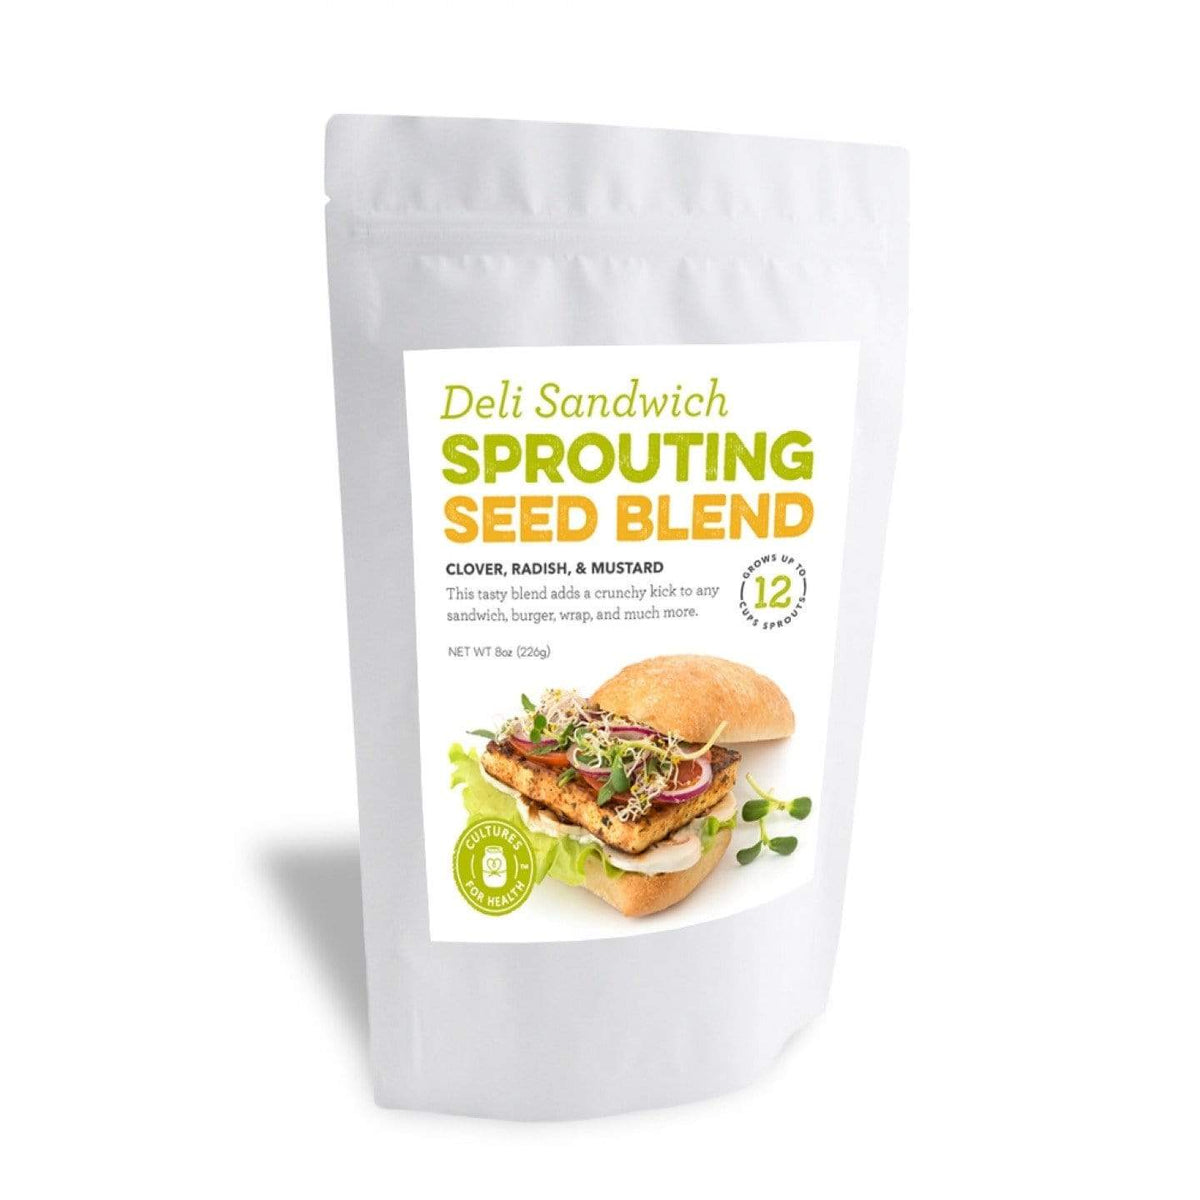 Sprouting &amp; Wheatgrass Deli Sandwich Sprouting Seed Blend